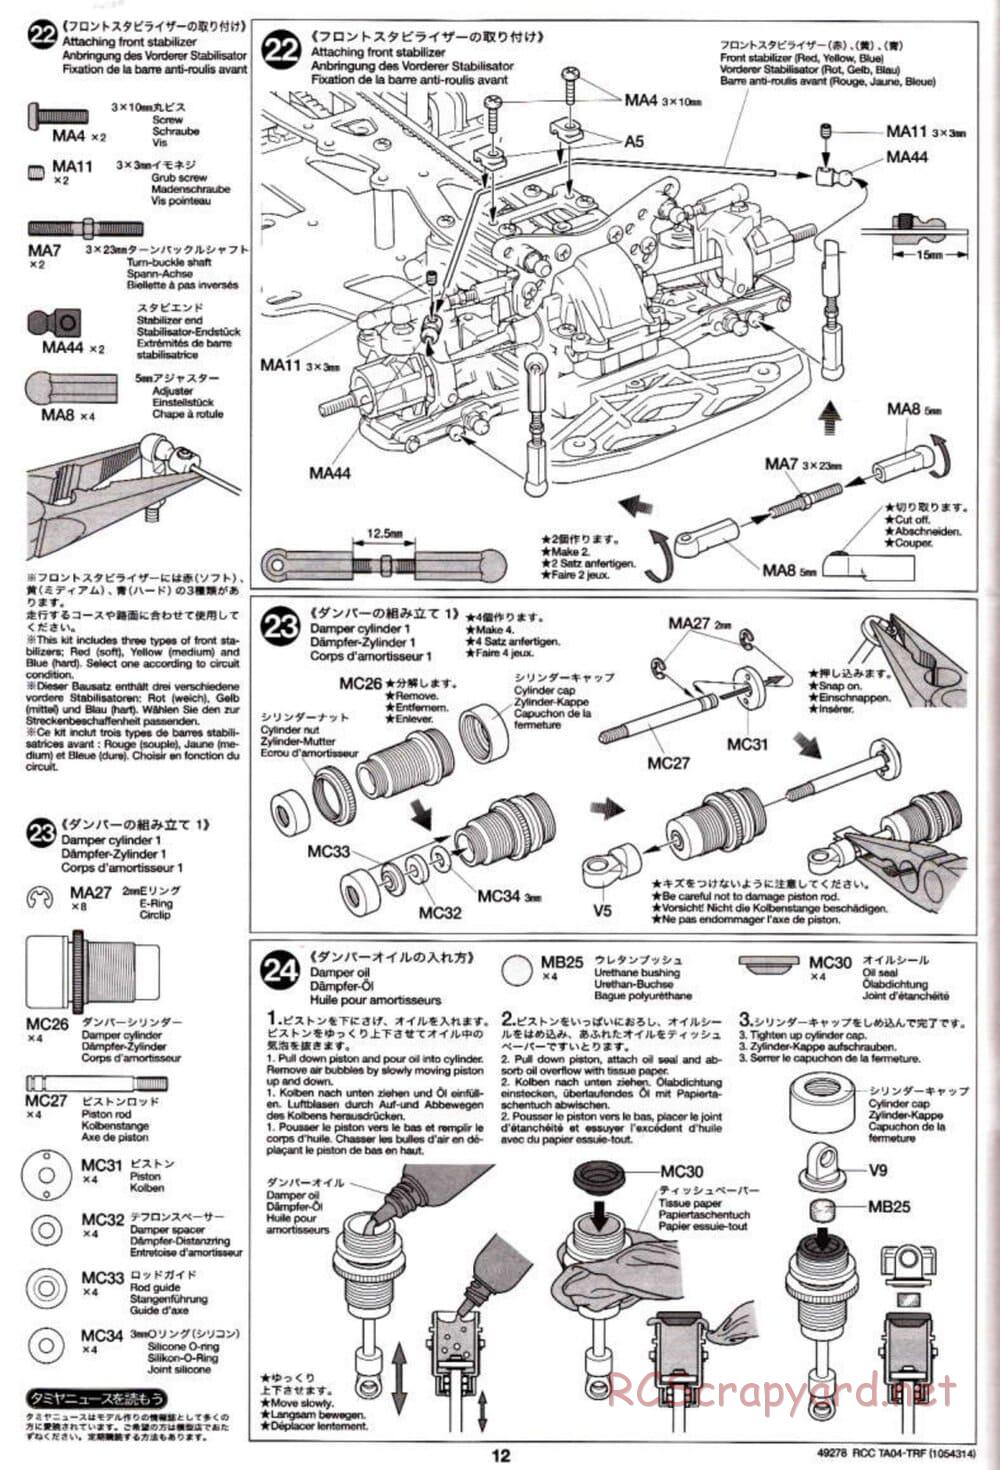 Tamiya - TA-04 TRF Special Chassis Chassis - Manual - Page 12